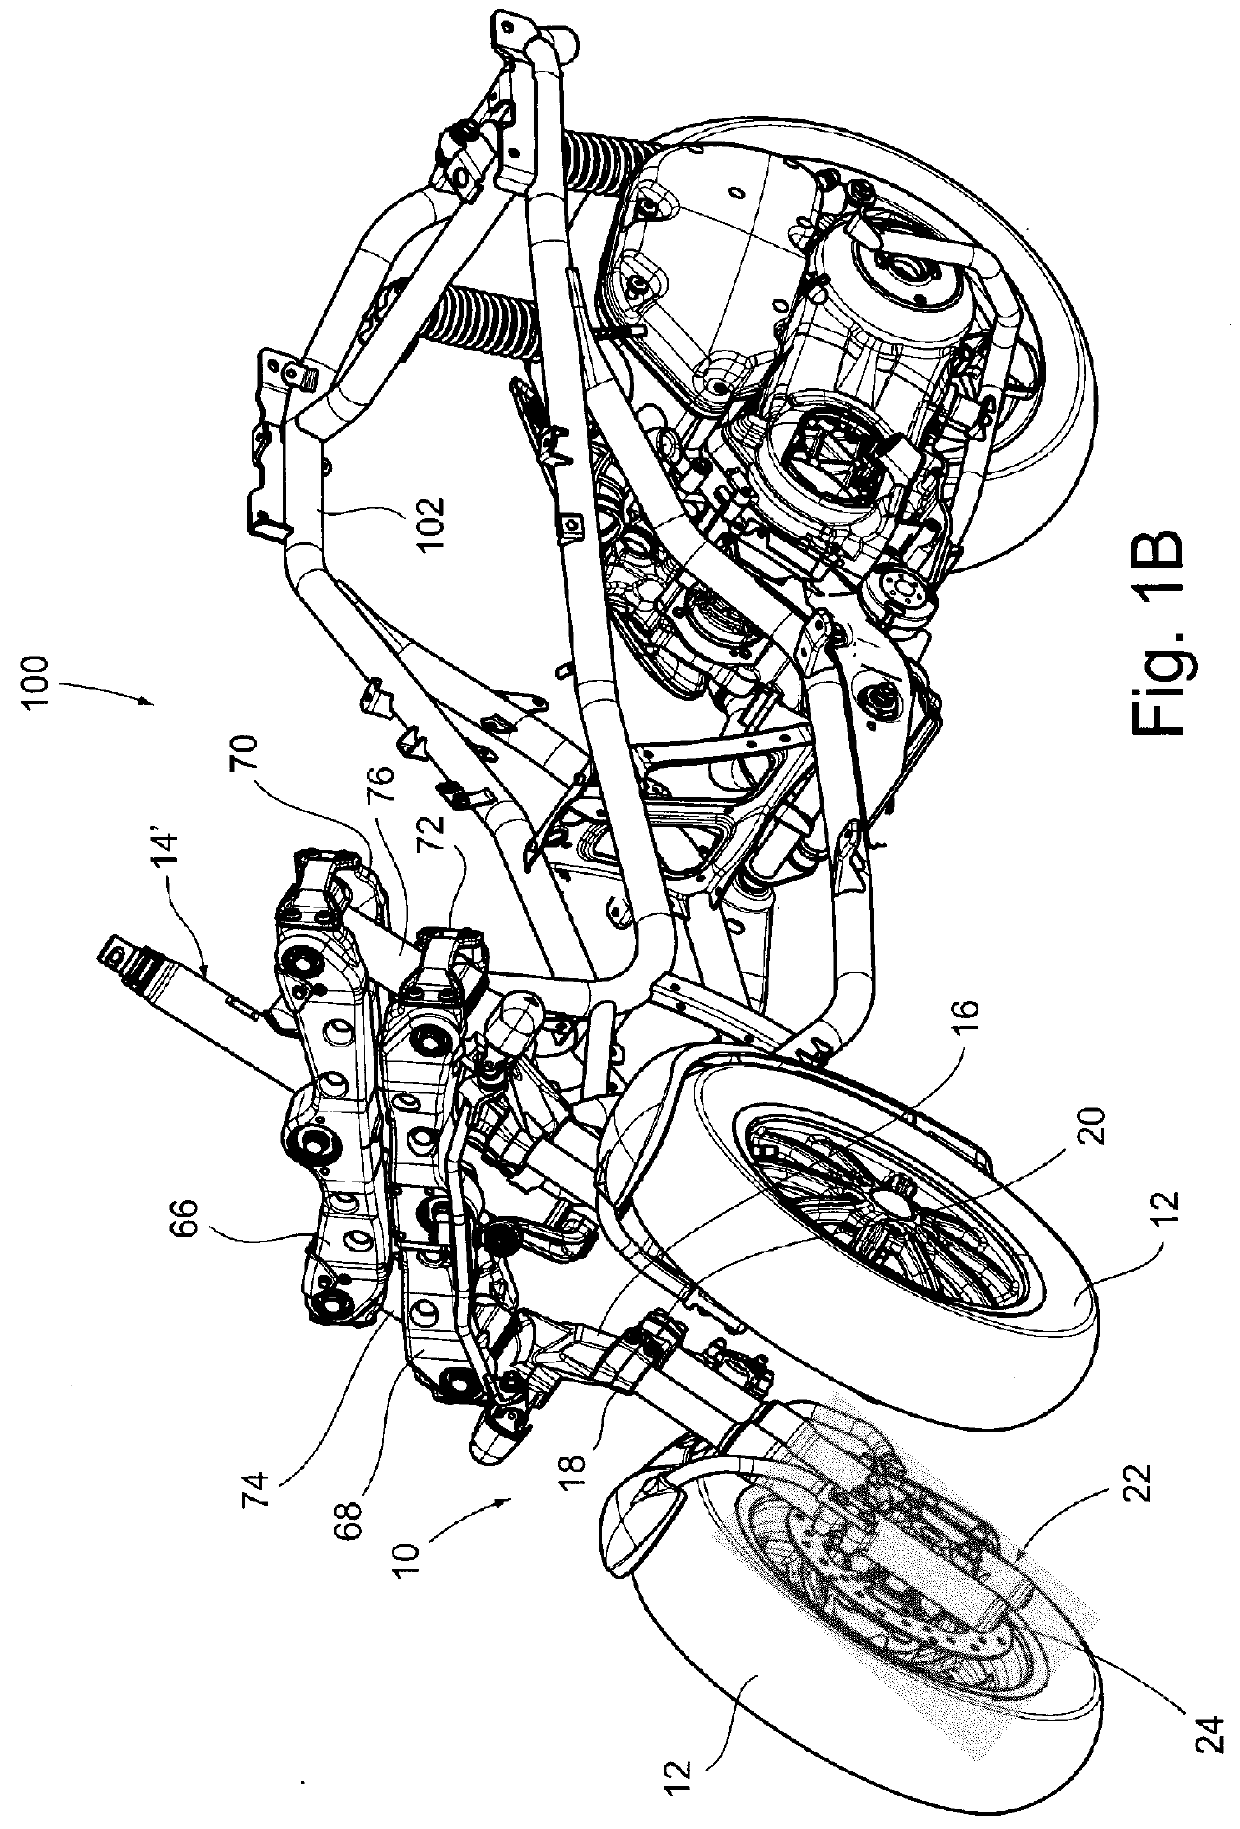 Tiltable motorcycles with two front steering wheels